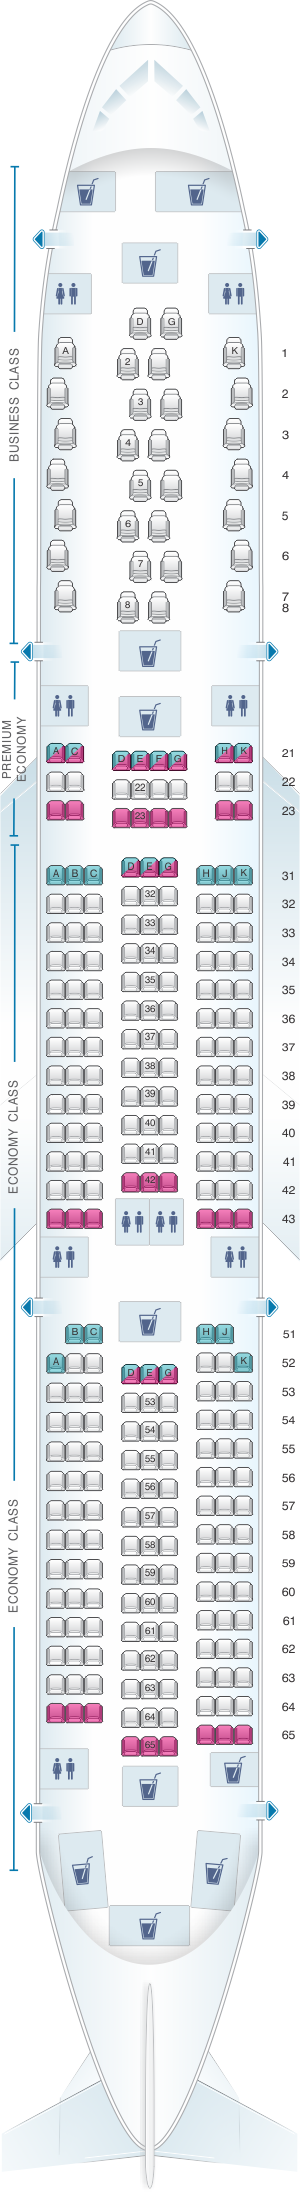 Seat map for Philippine Airlines Airbus A350 900